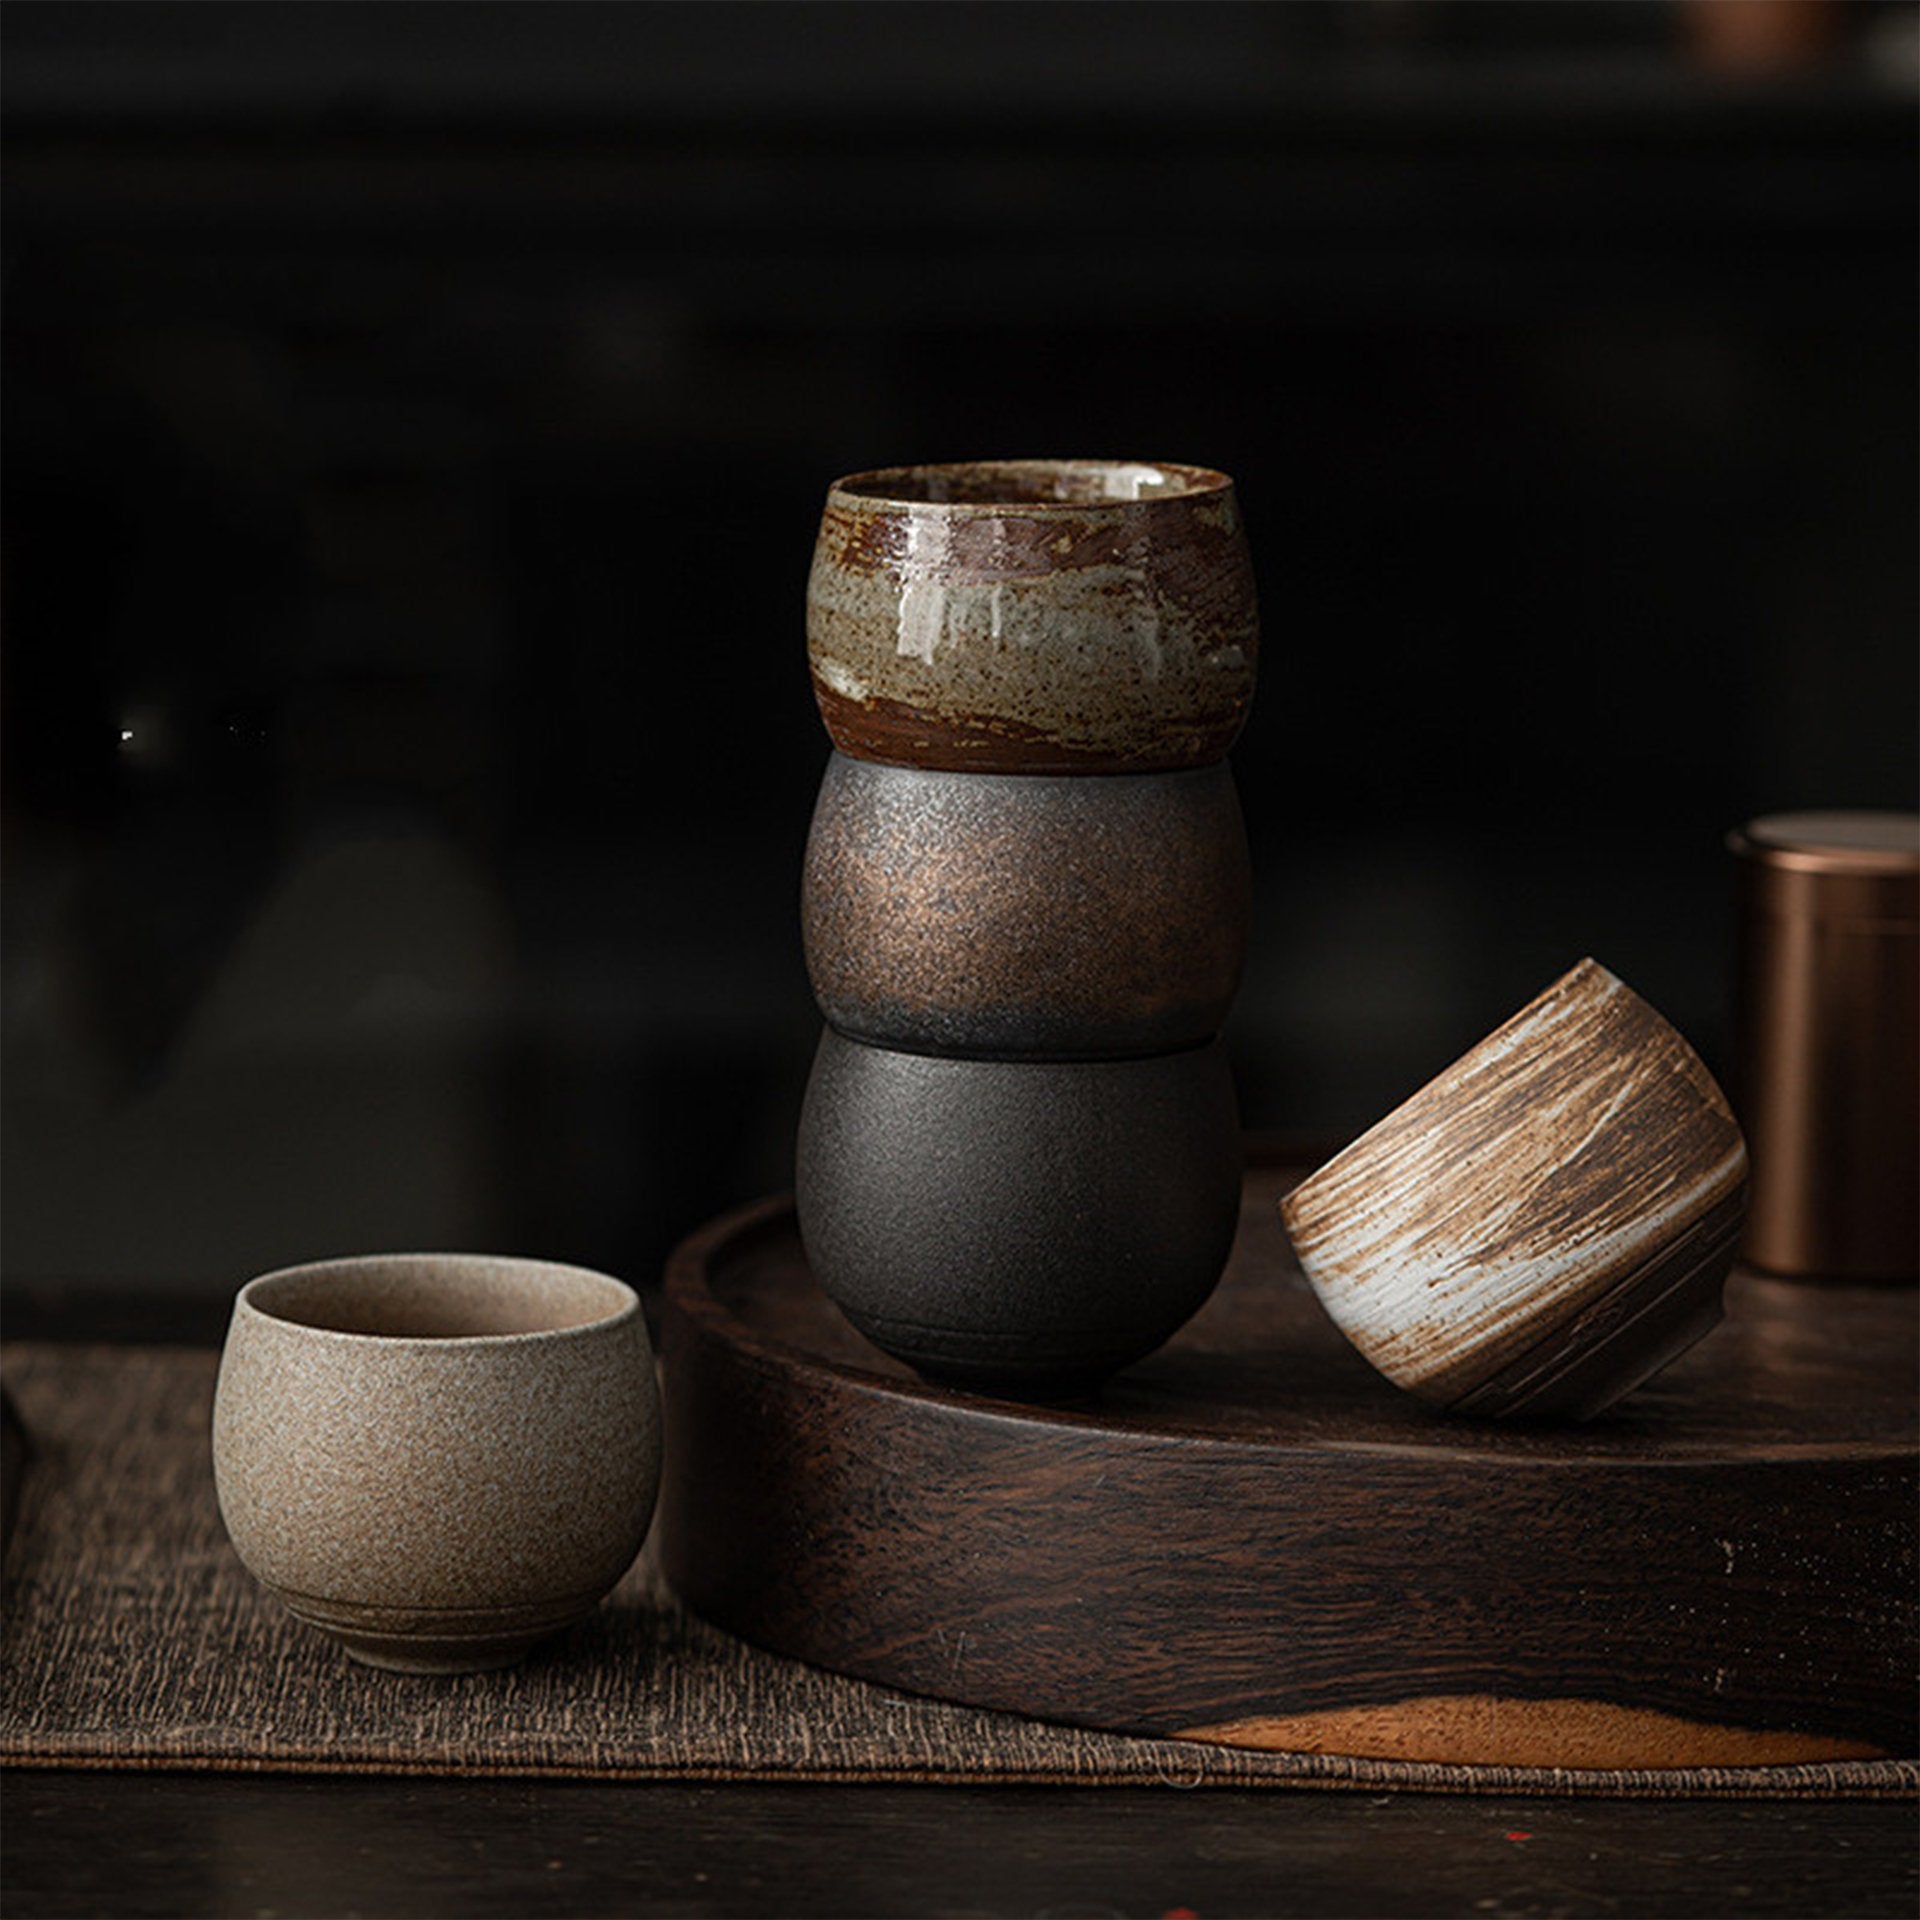 Stacked ceramic tea bowls in brown, black, and beige on wooden tray